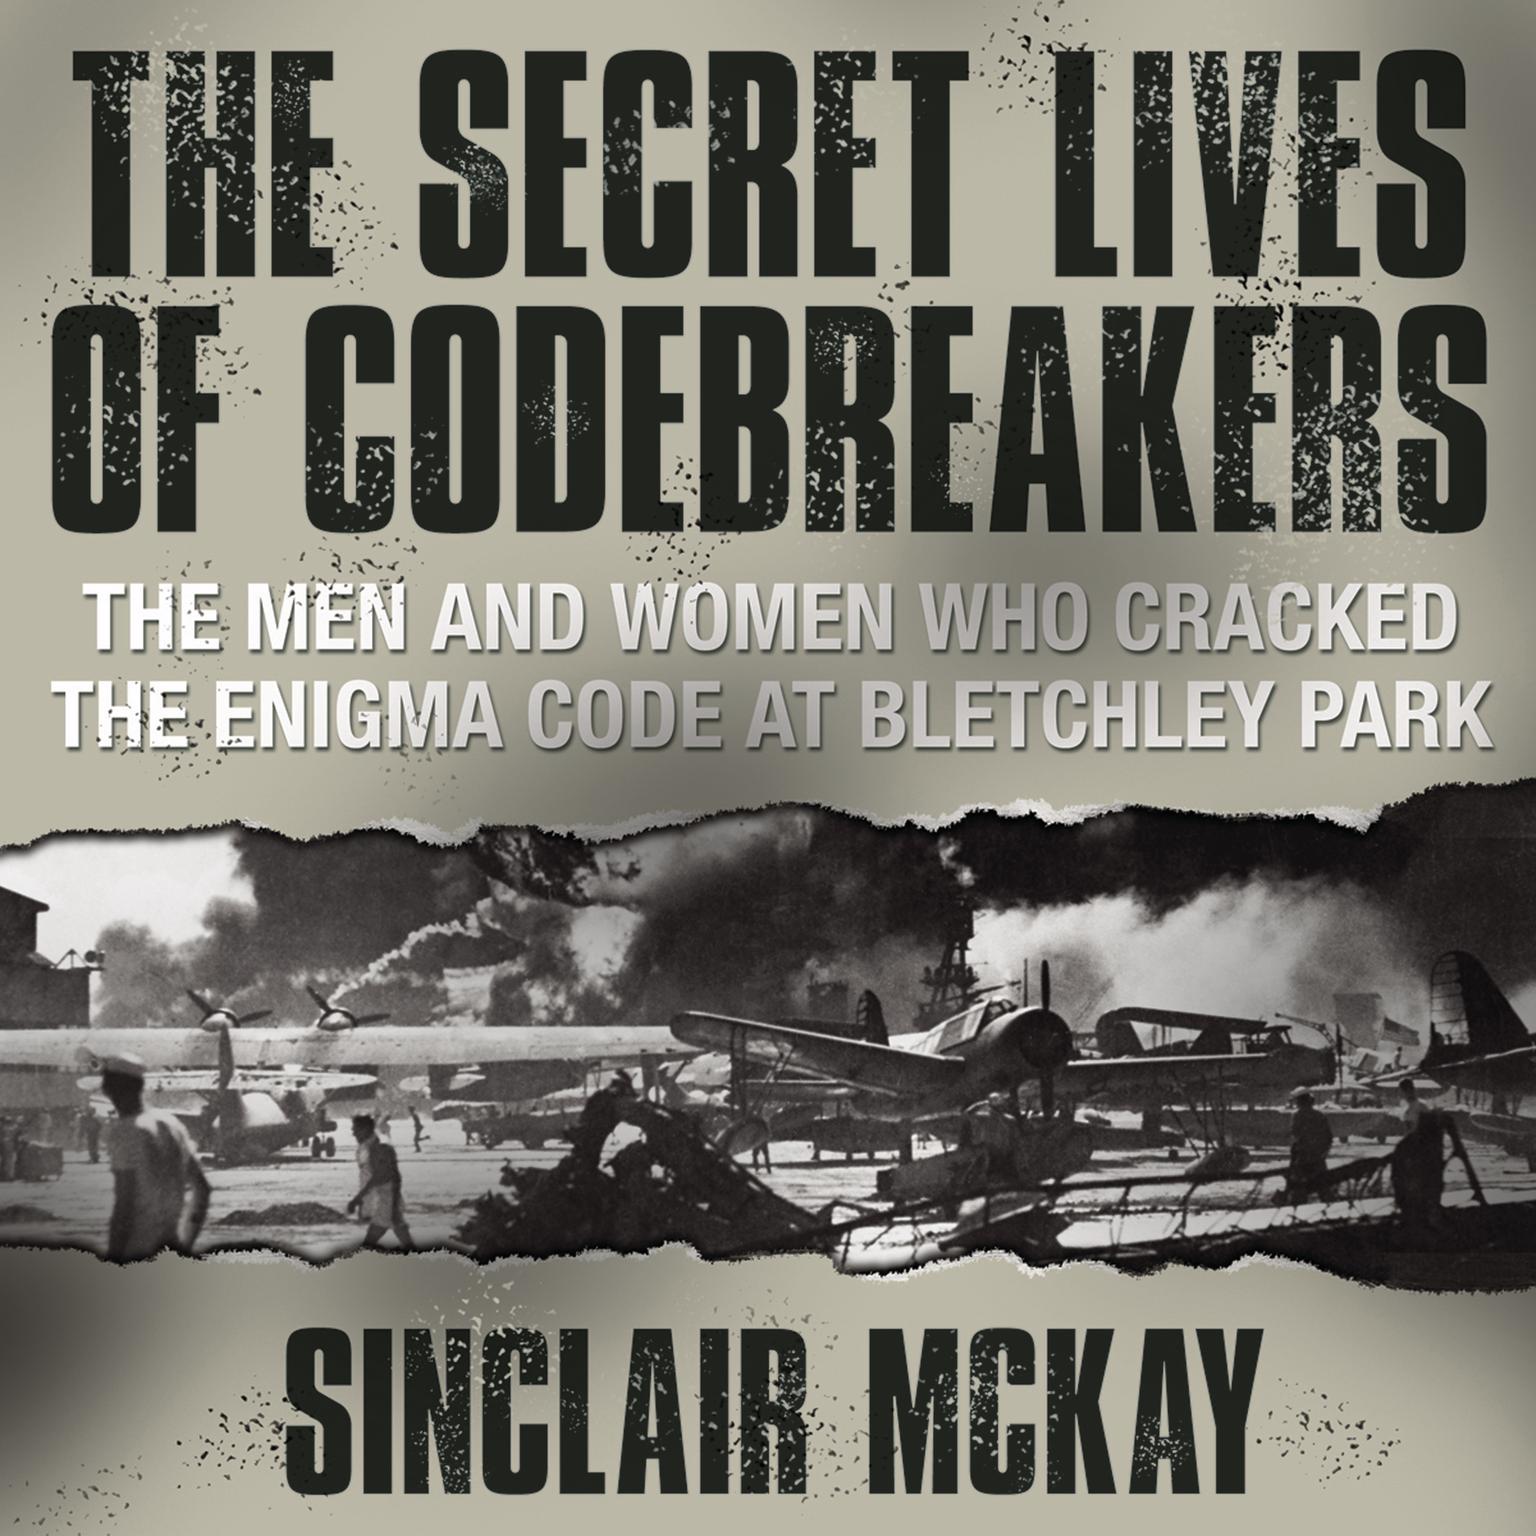 The Secret Lives Codebreakers: The Men and Women Who Cracked the Enigma Code at Bletchley Park Audiobook, by Sinclair McKay